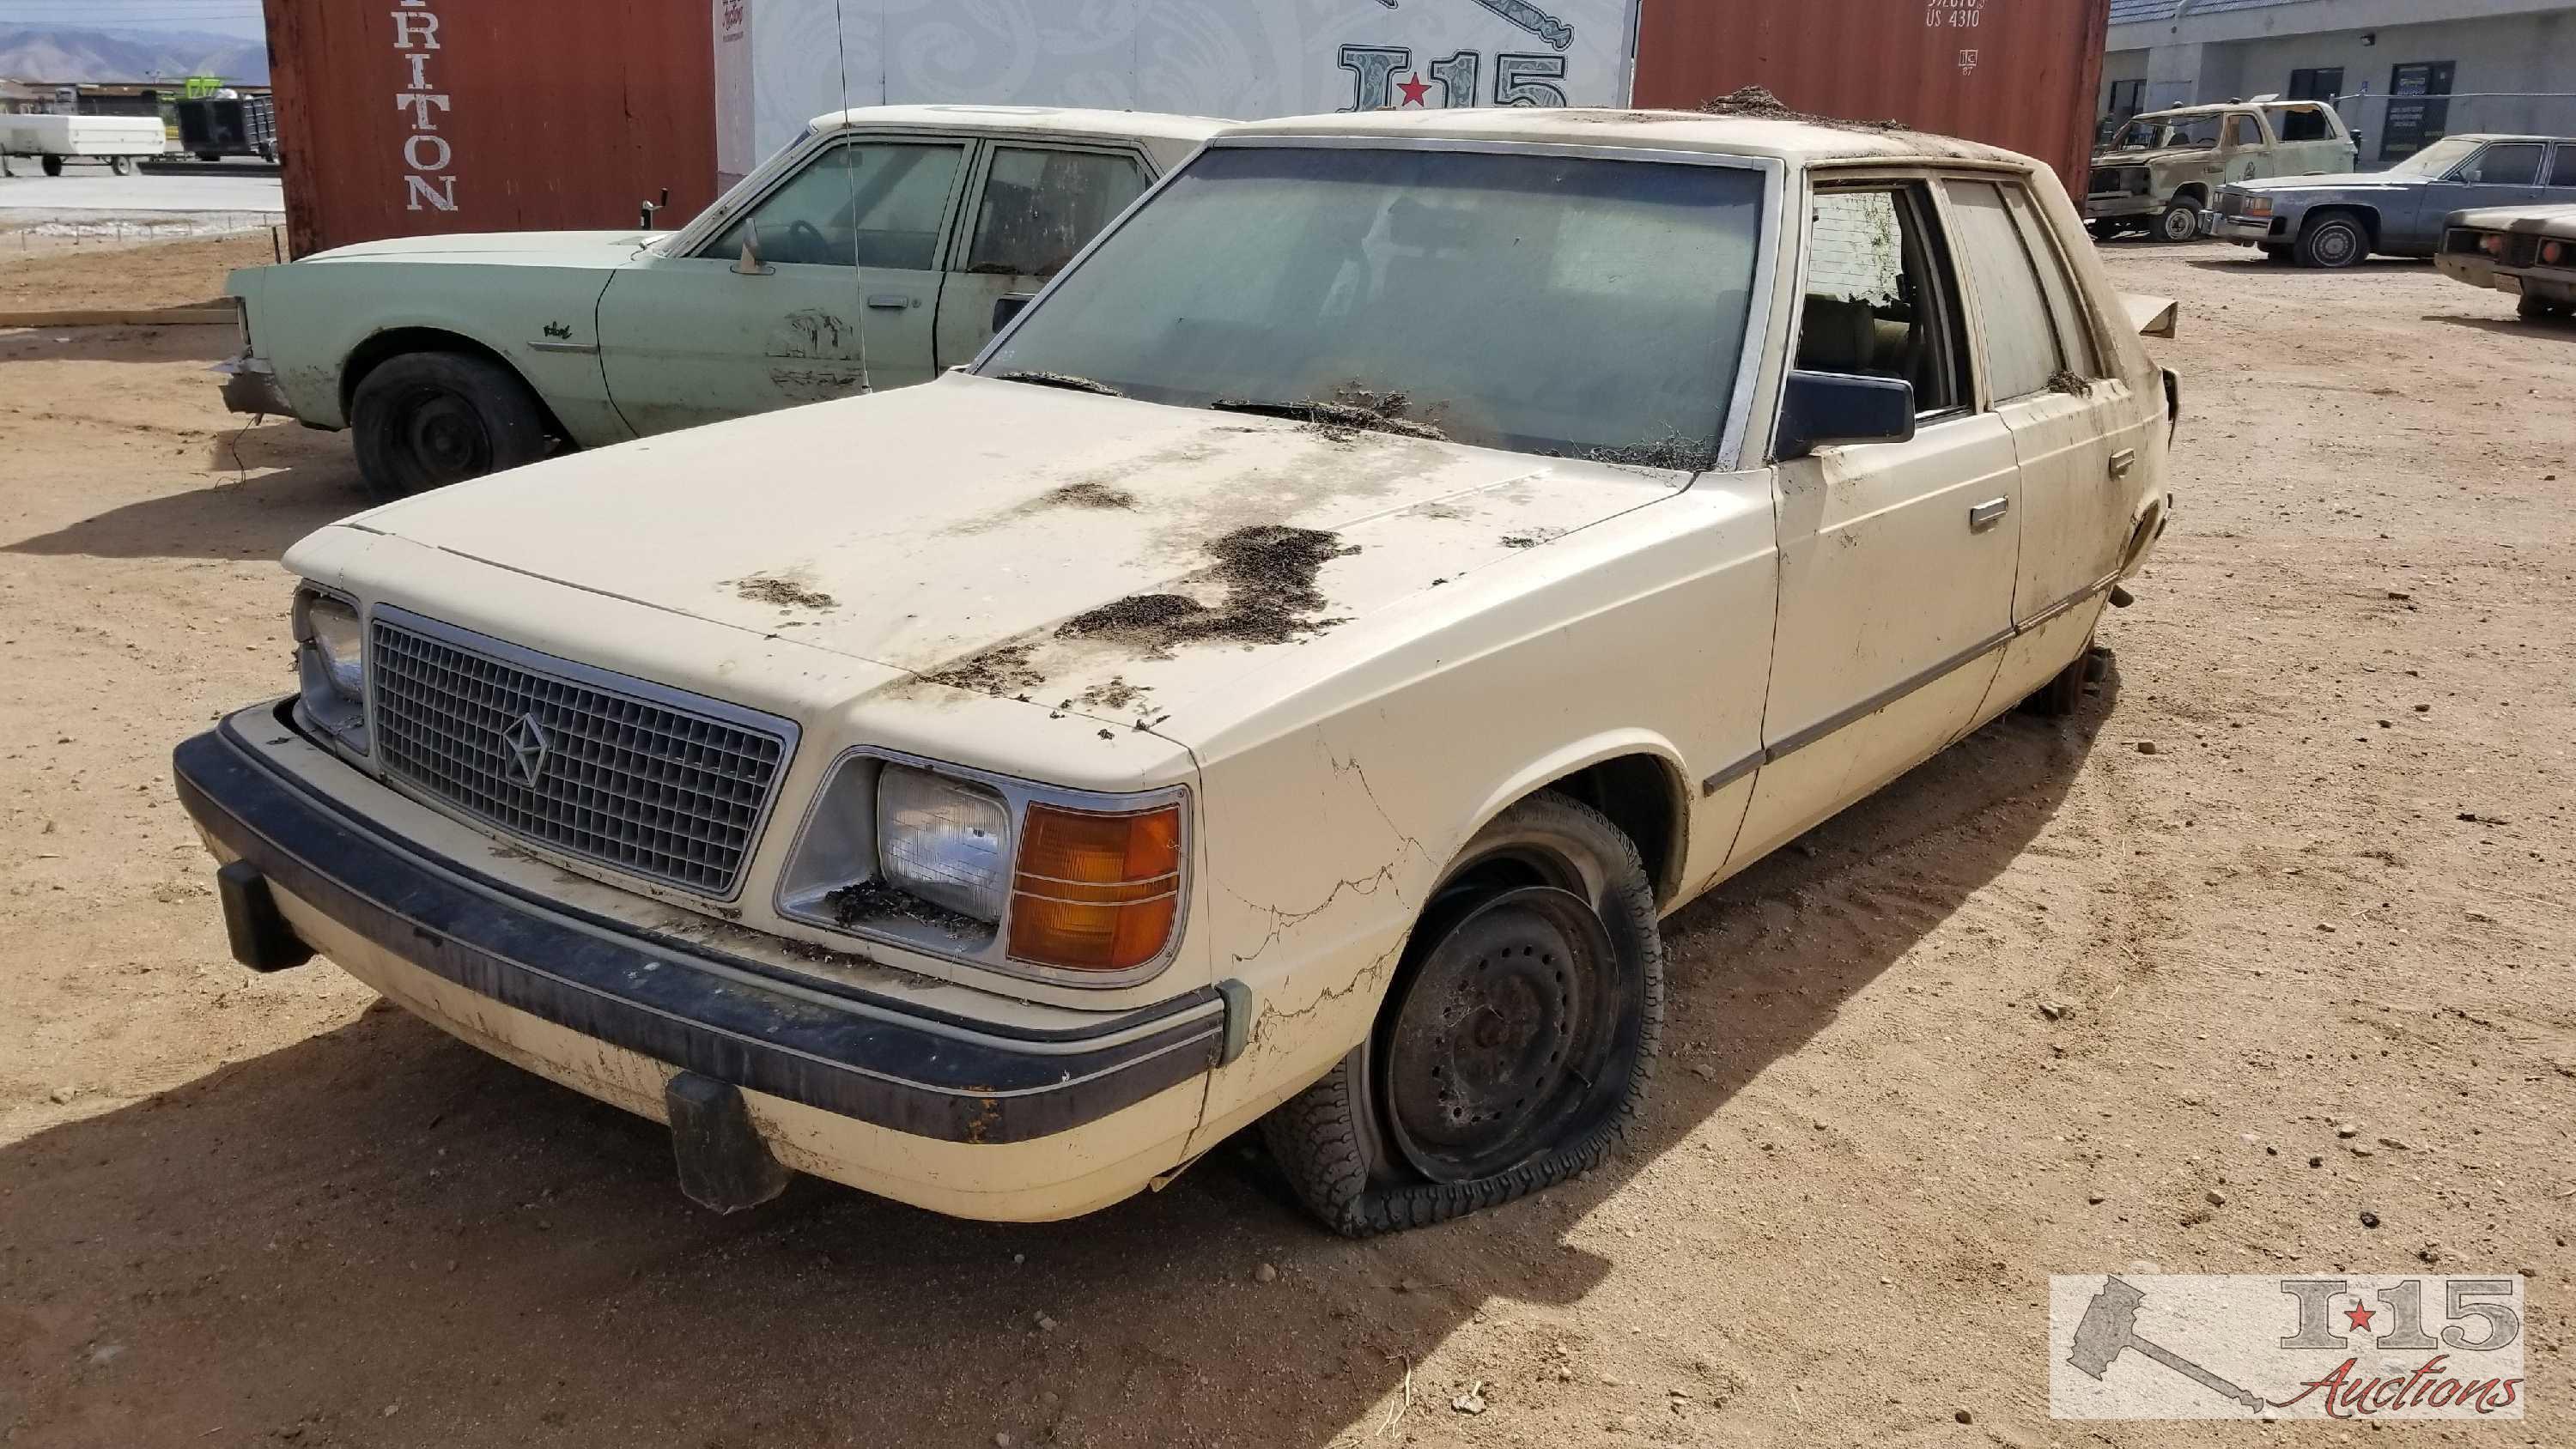 1986 Plymouth Reliant